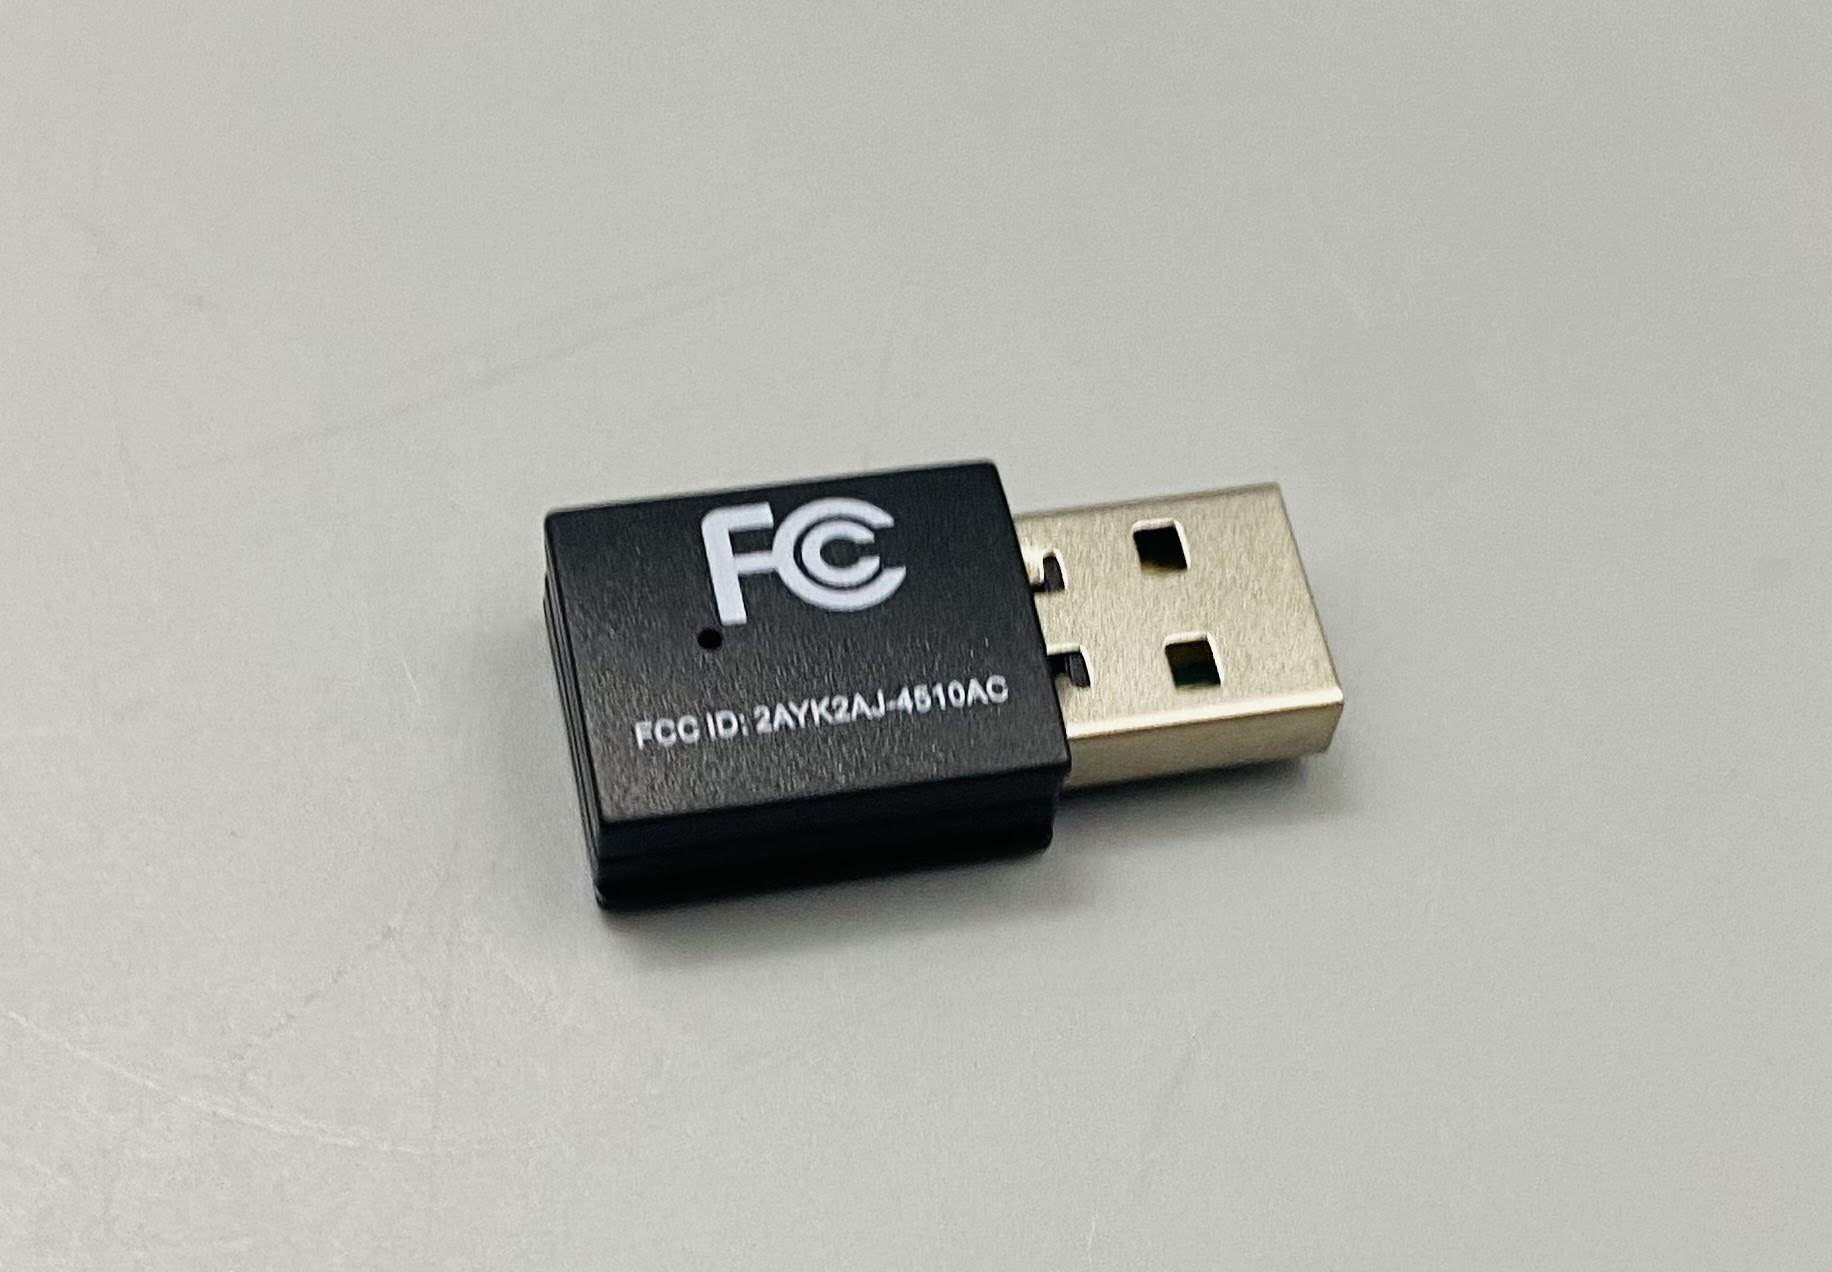 WiFi Dongle for "G4" Xite radio models